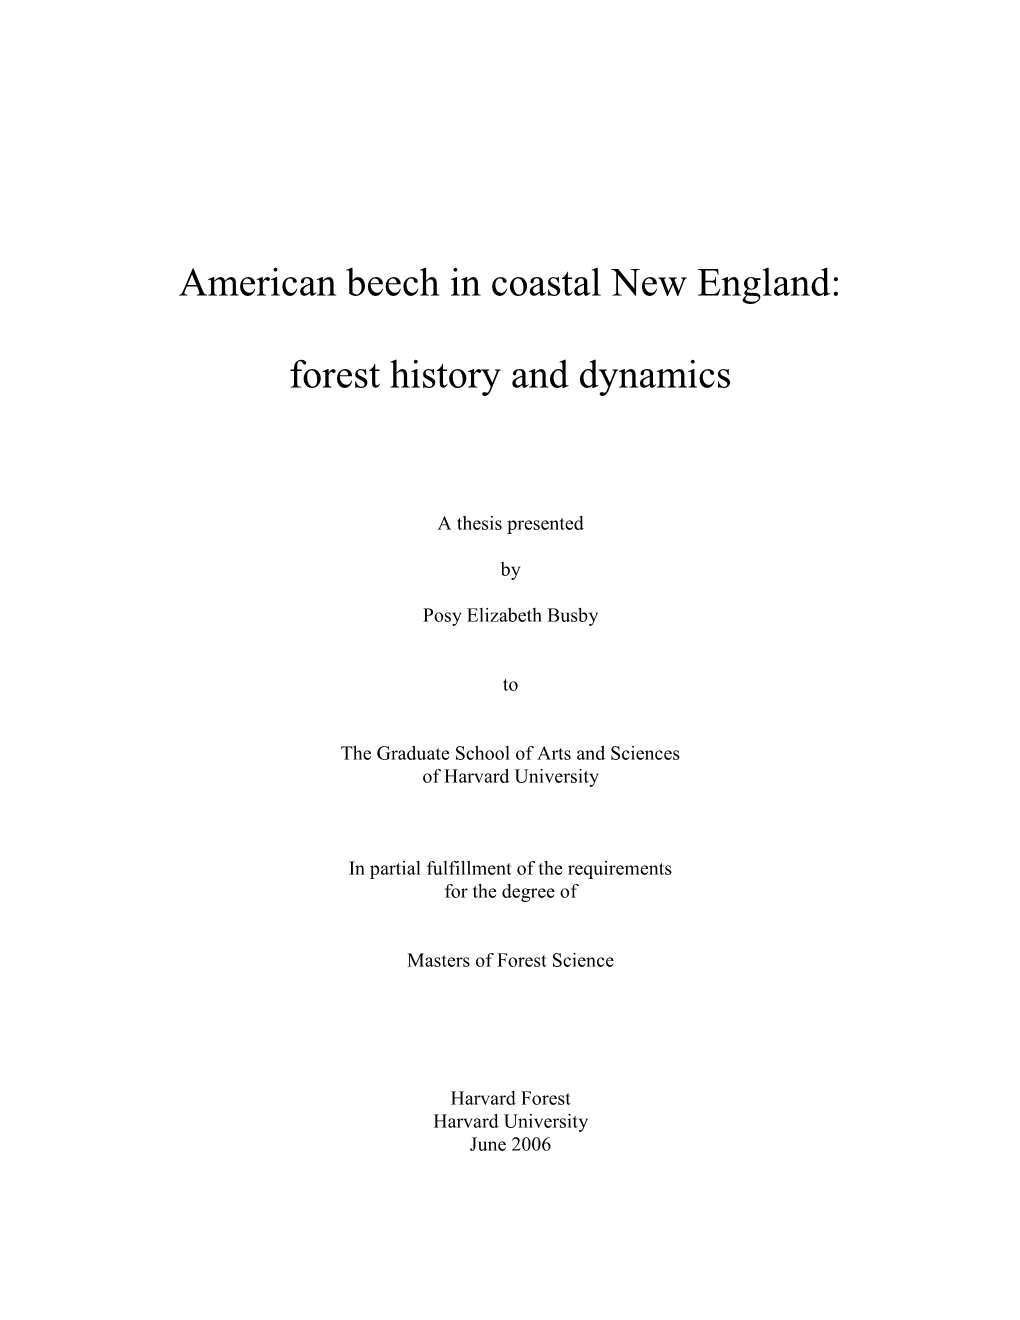 American Beech in Coastal New England: Forest History and Dynamics